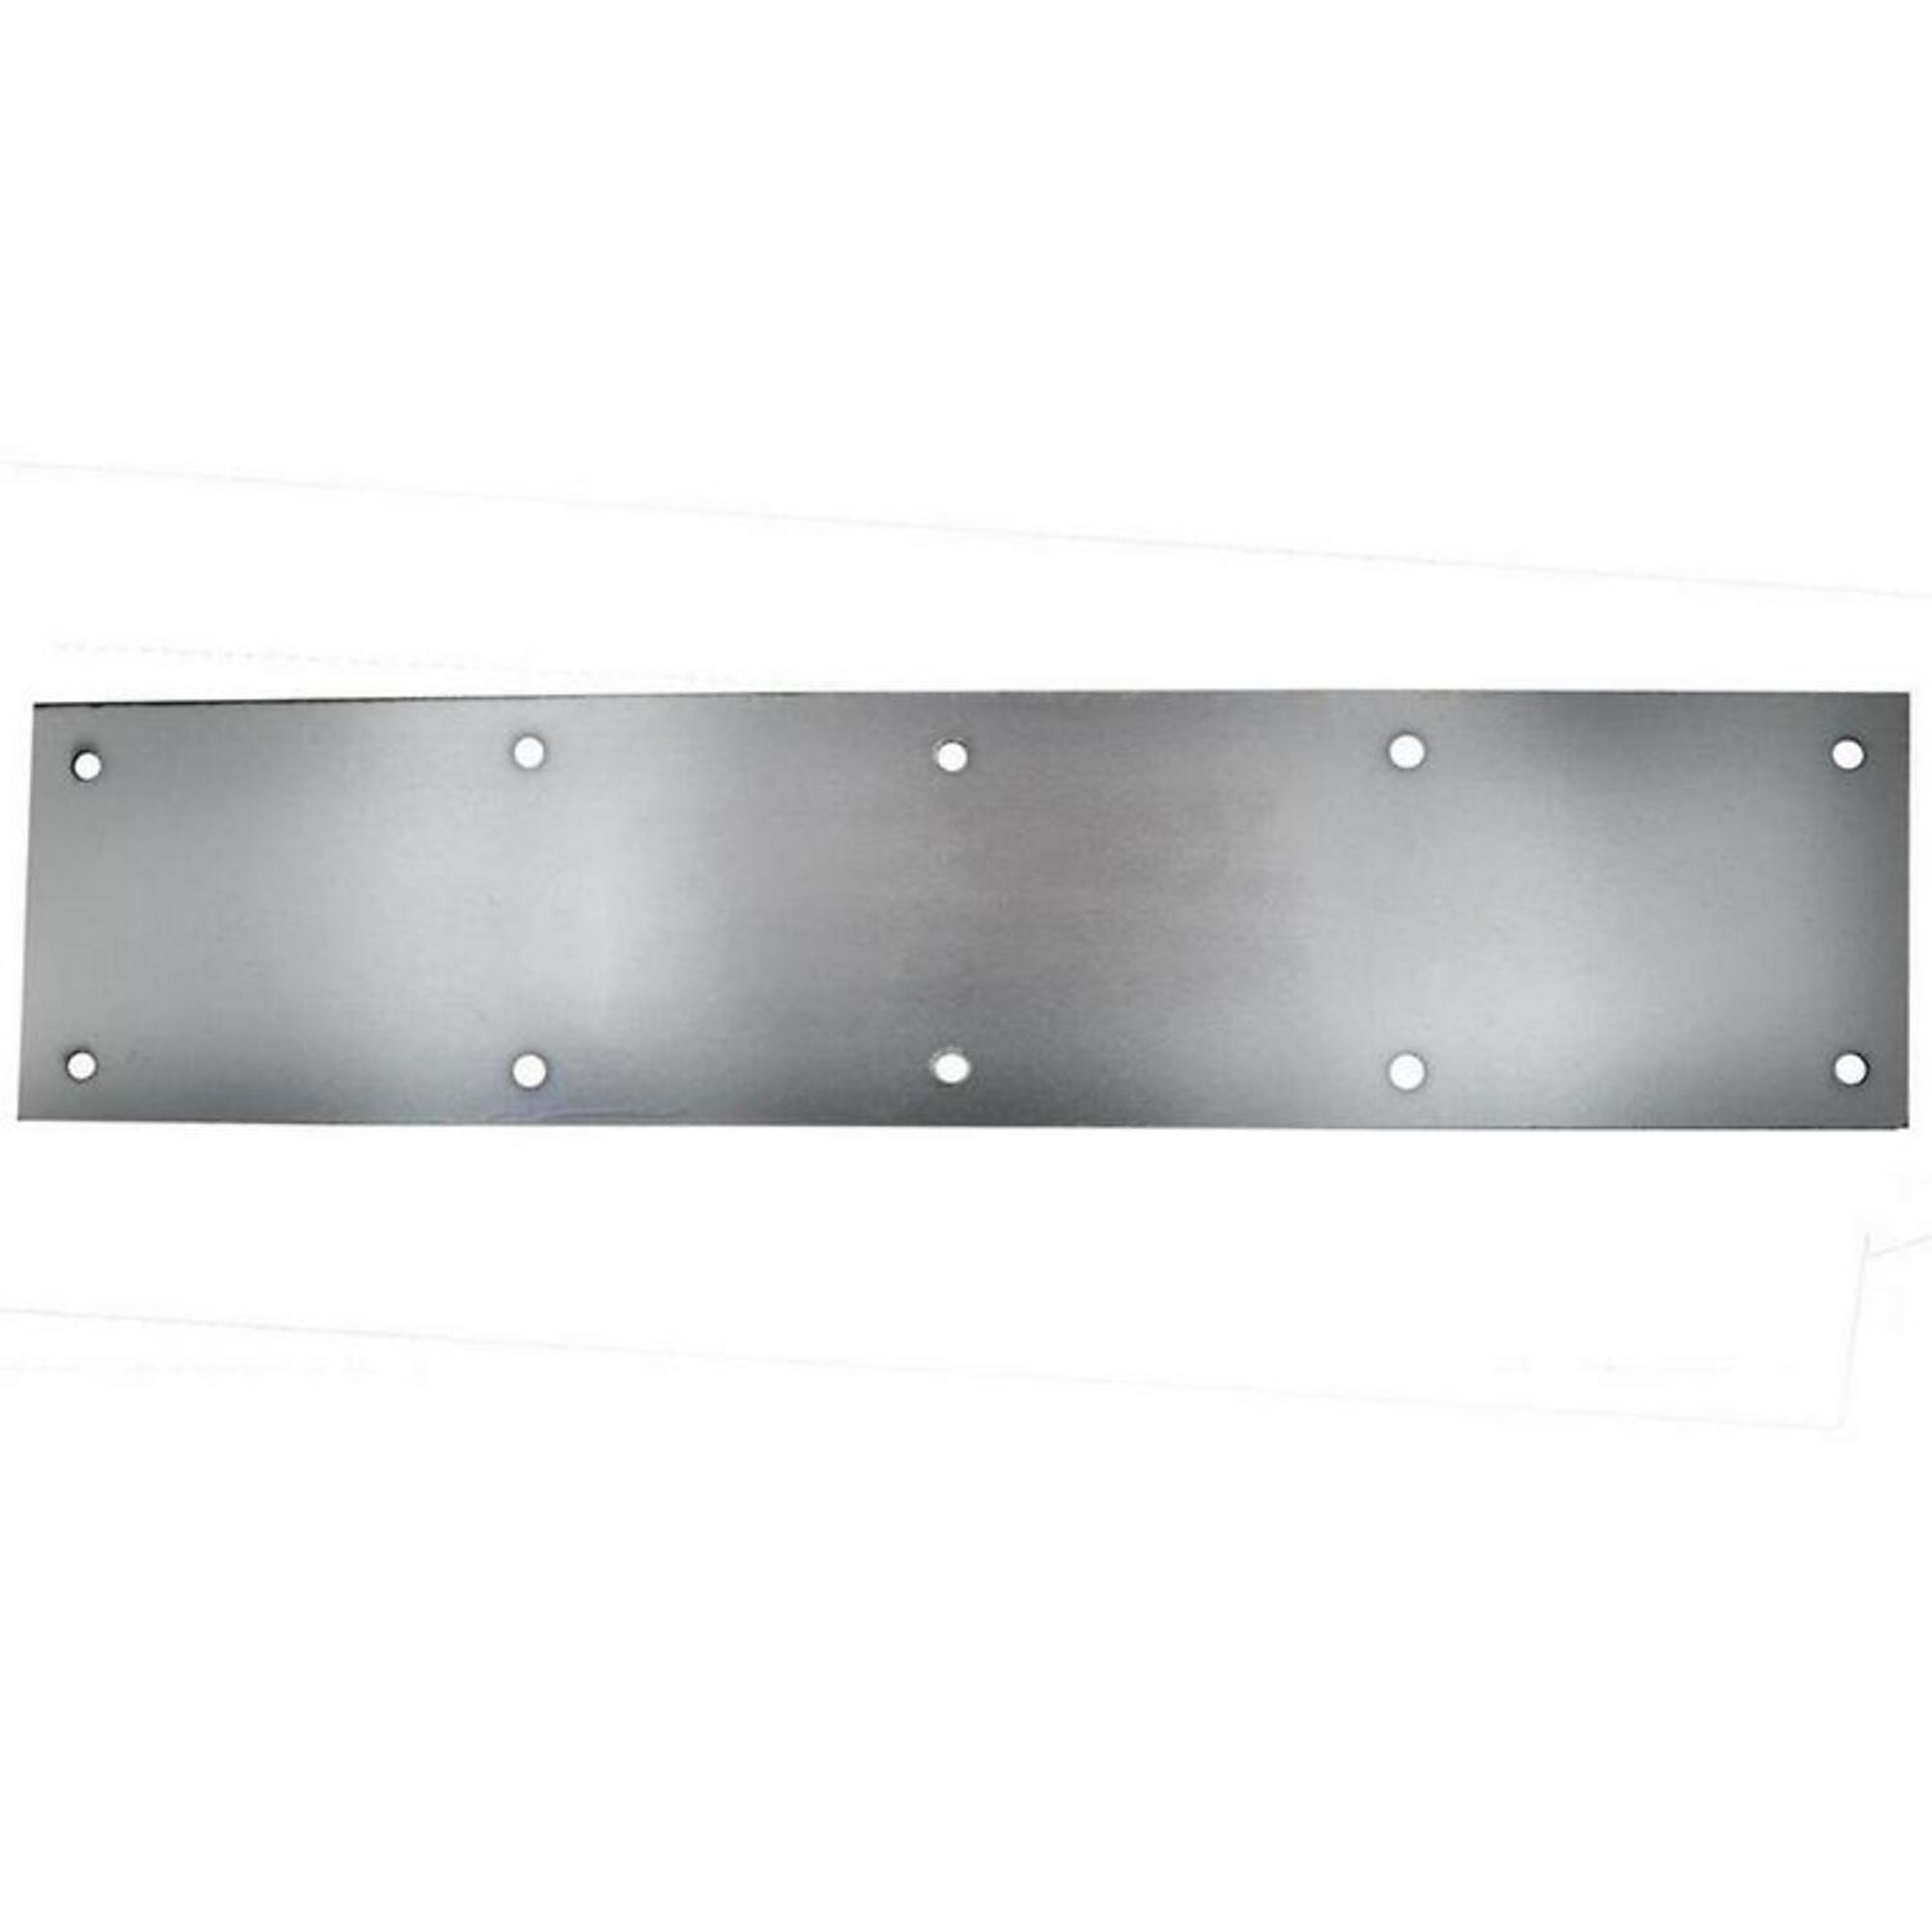 Trans Atlantic, 8Inch x 34Inch Stainless Steel Commercial Kick Plate, Model GH-KP834-US32D